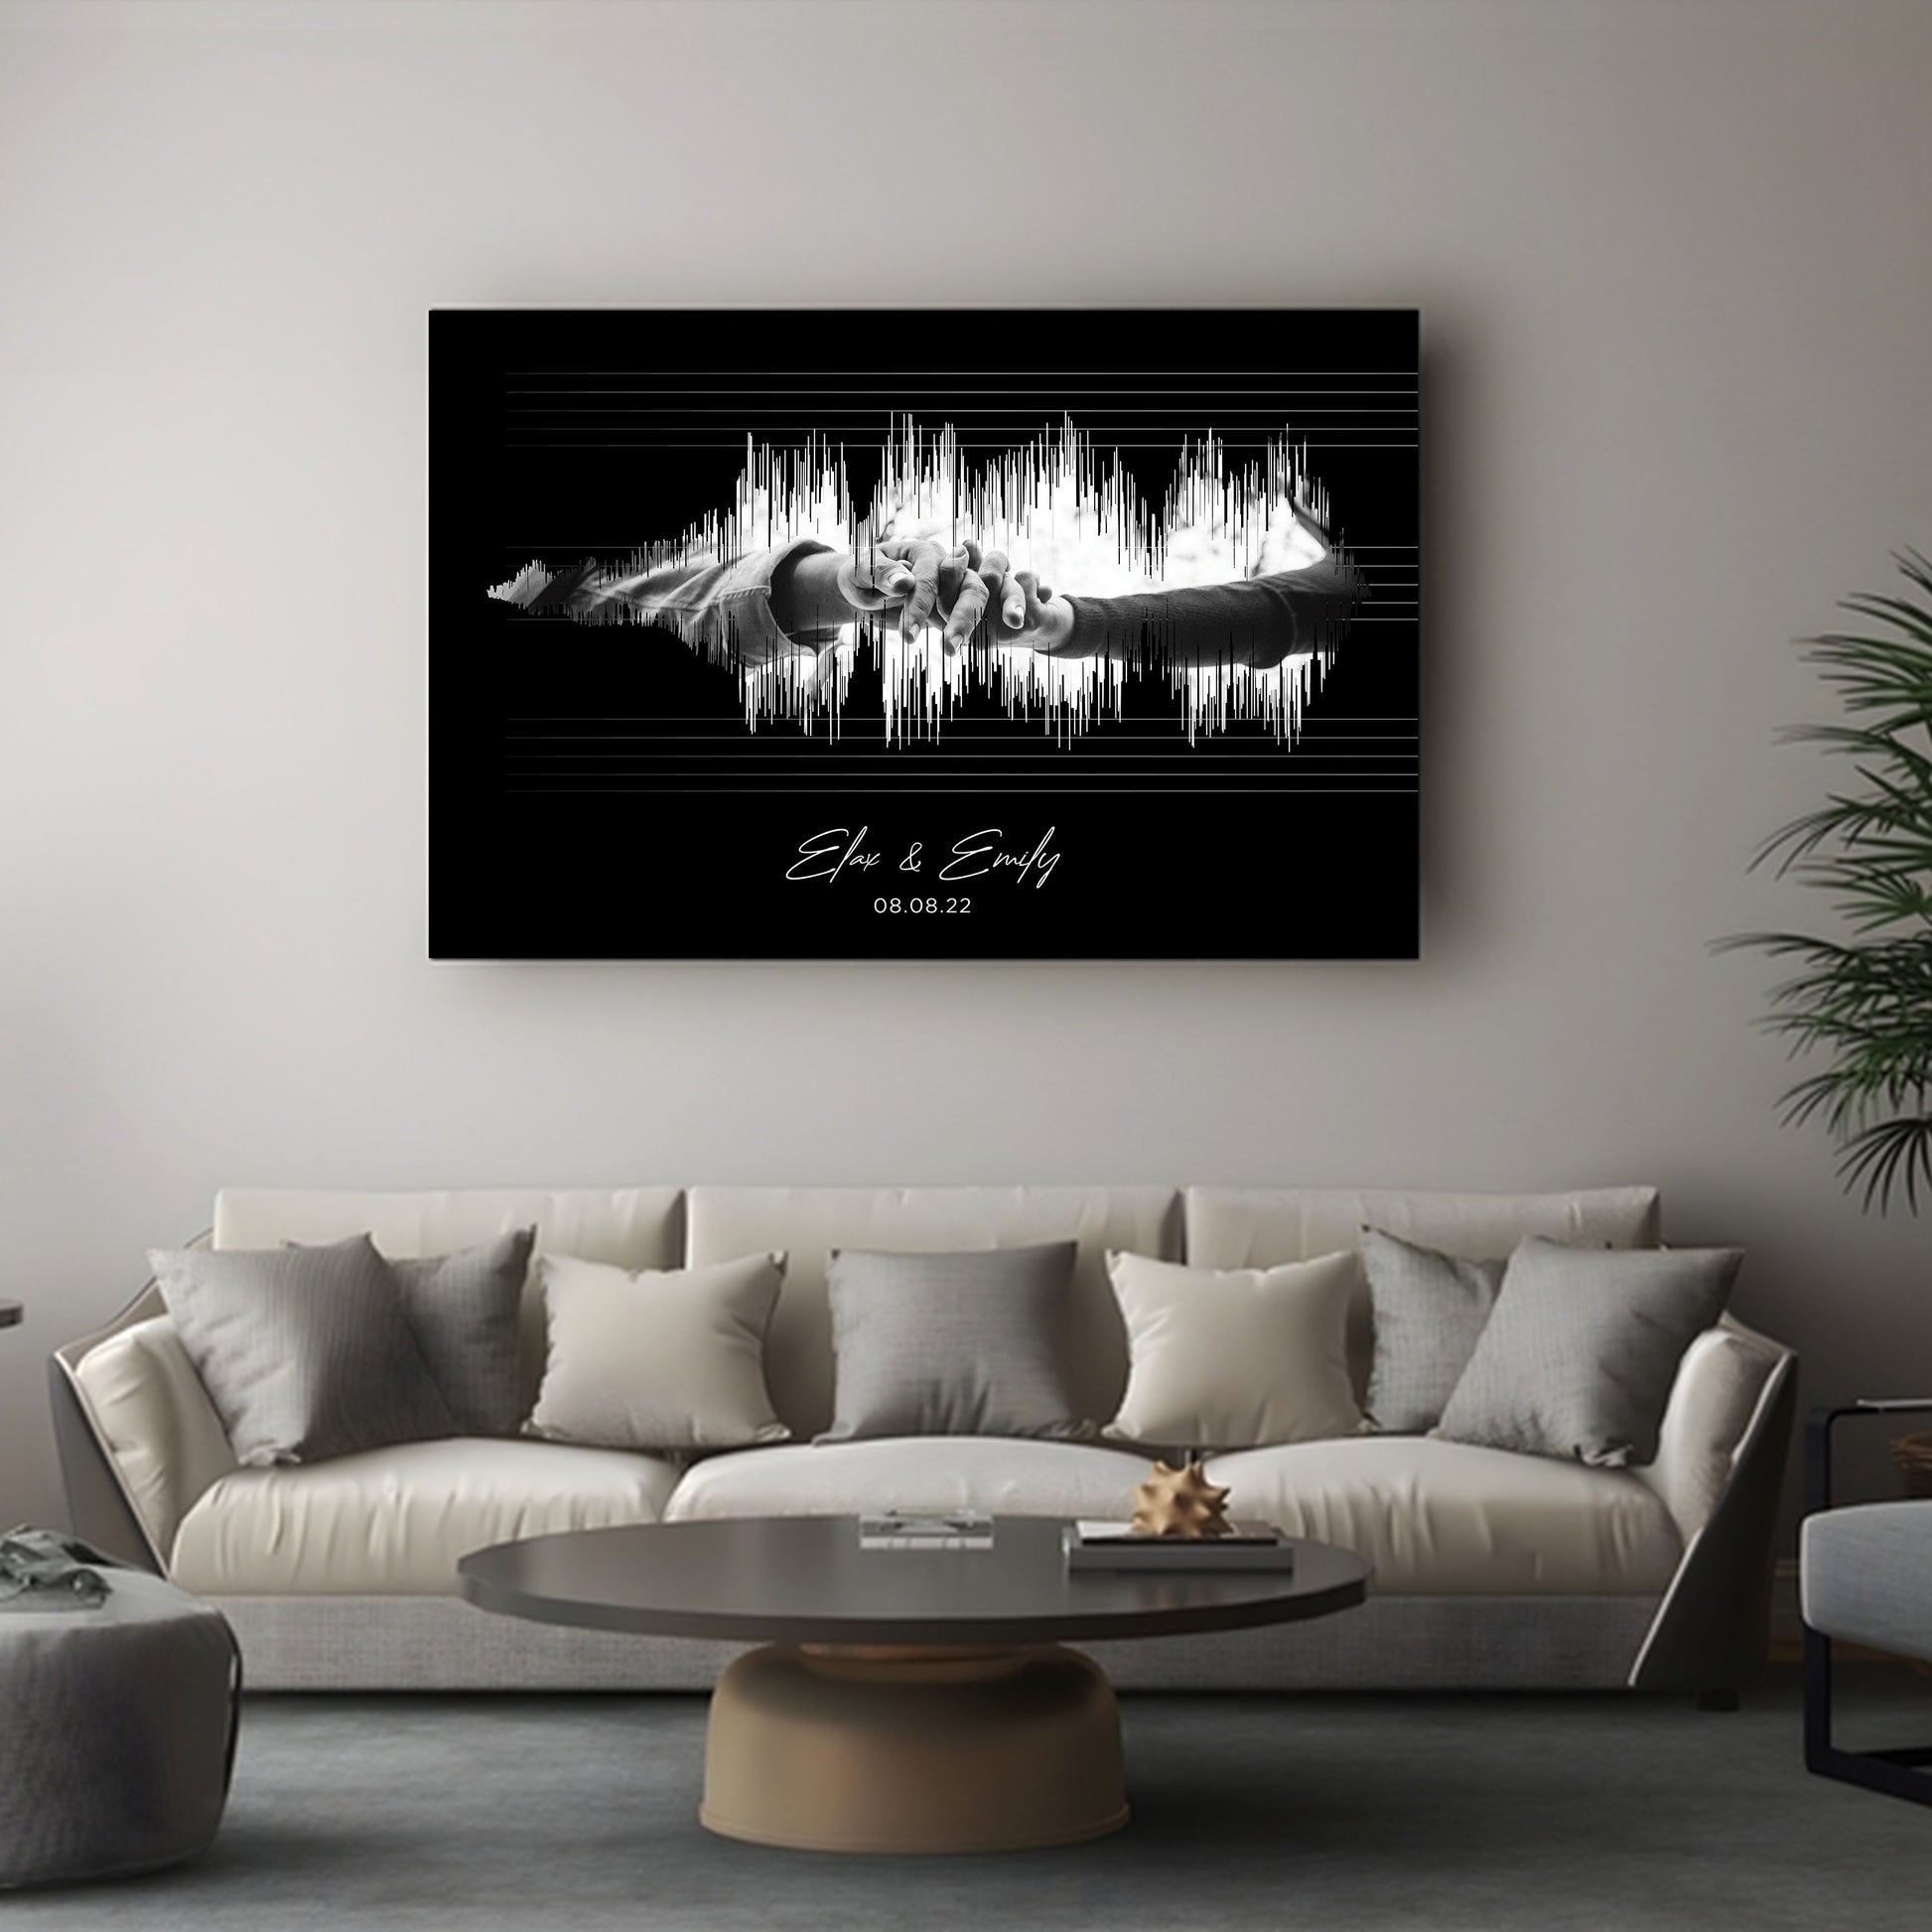 Custom soundwave Wall art print on framed canvas, a thoughtful personalized gift.